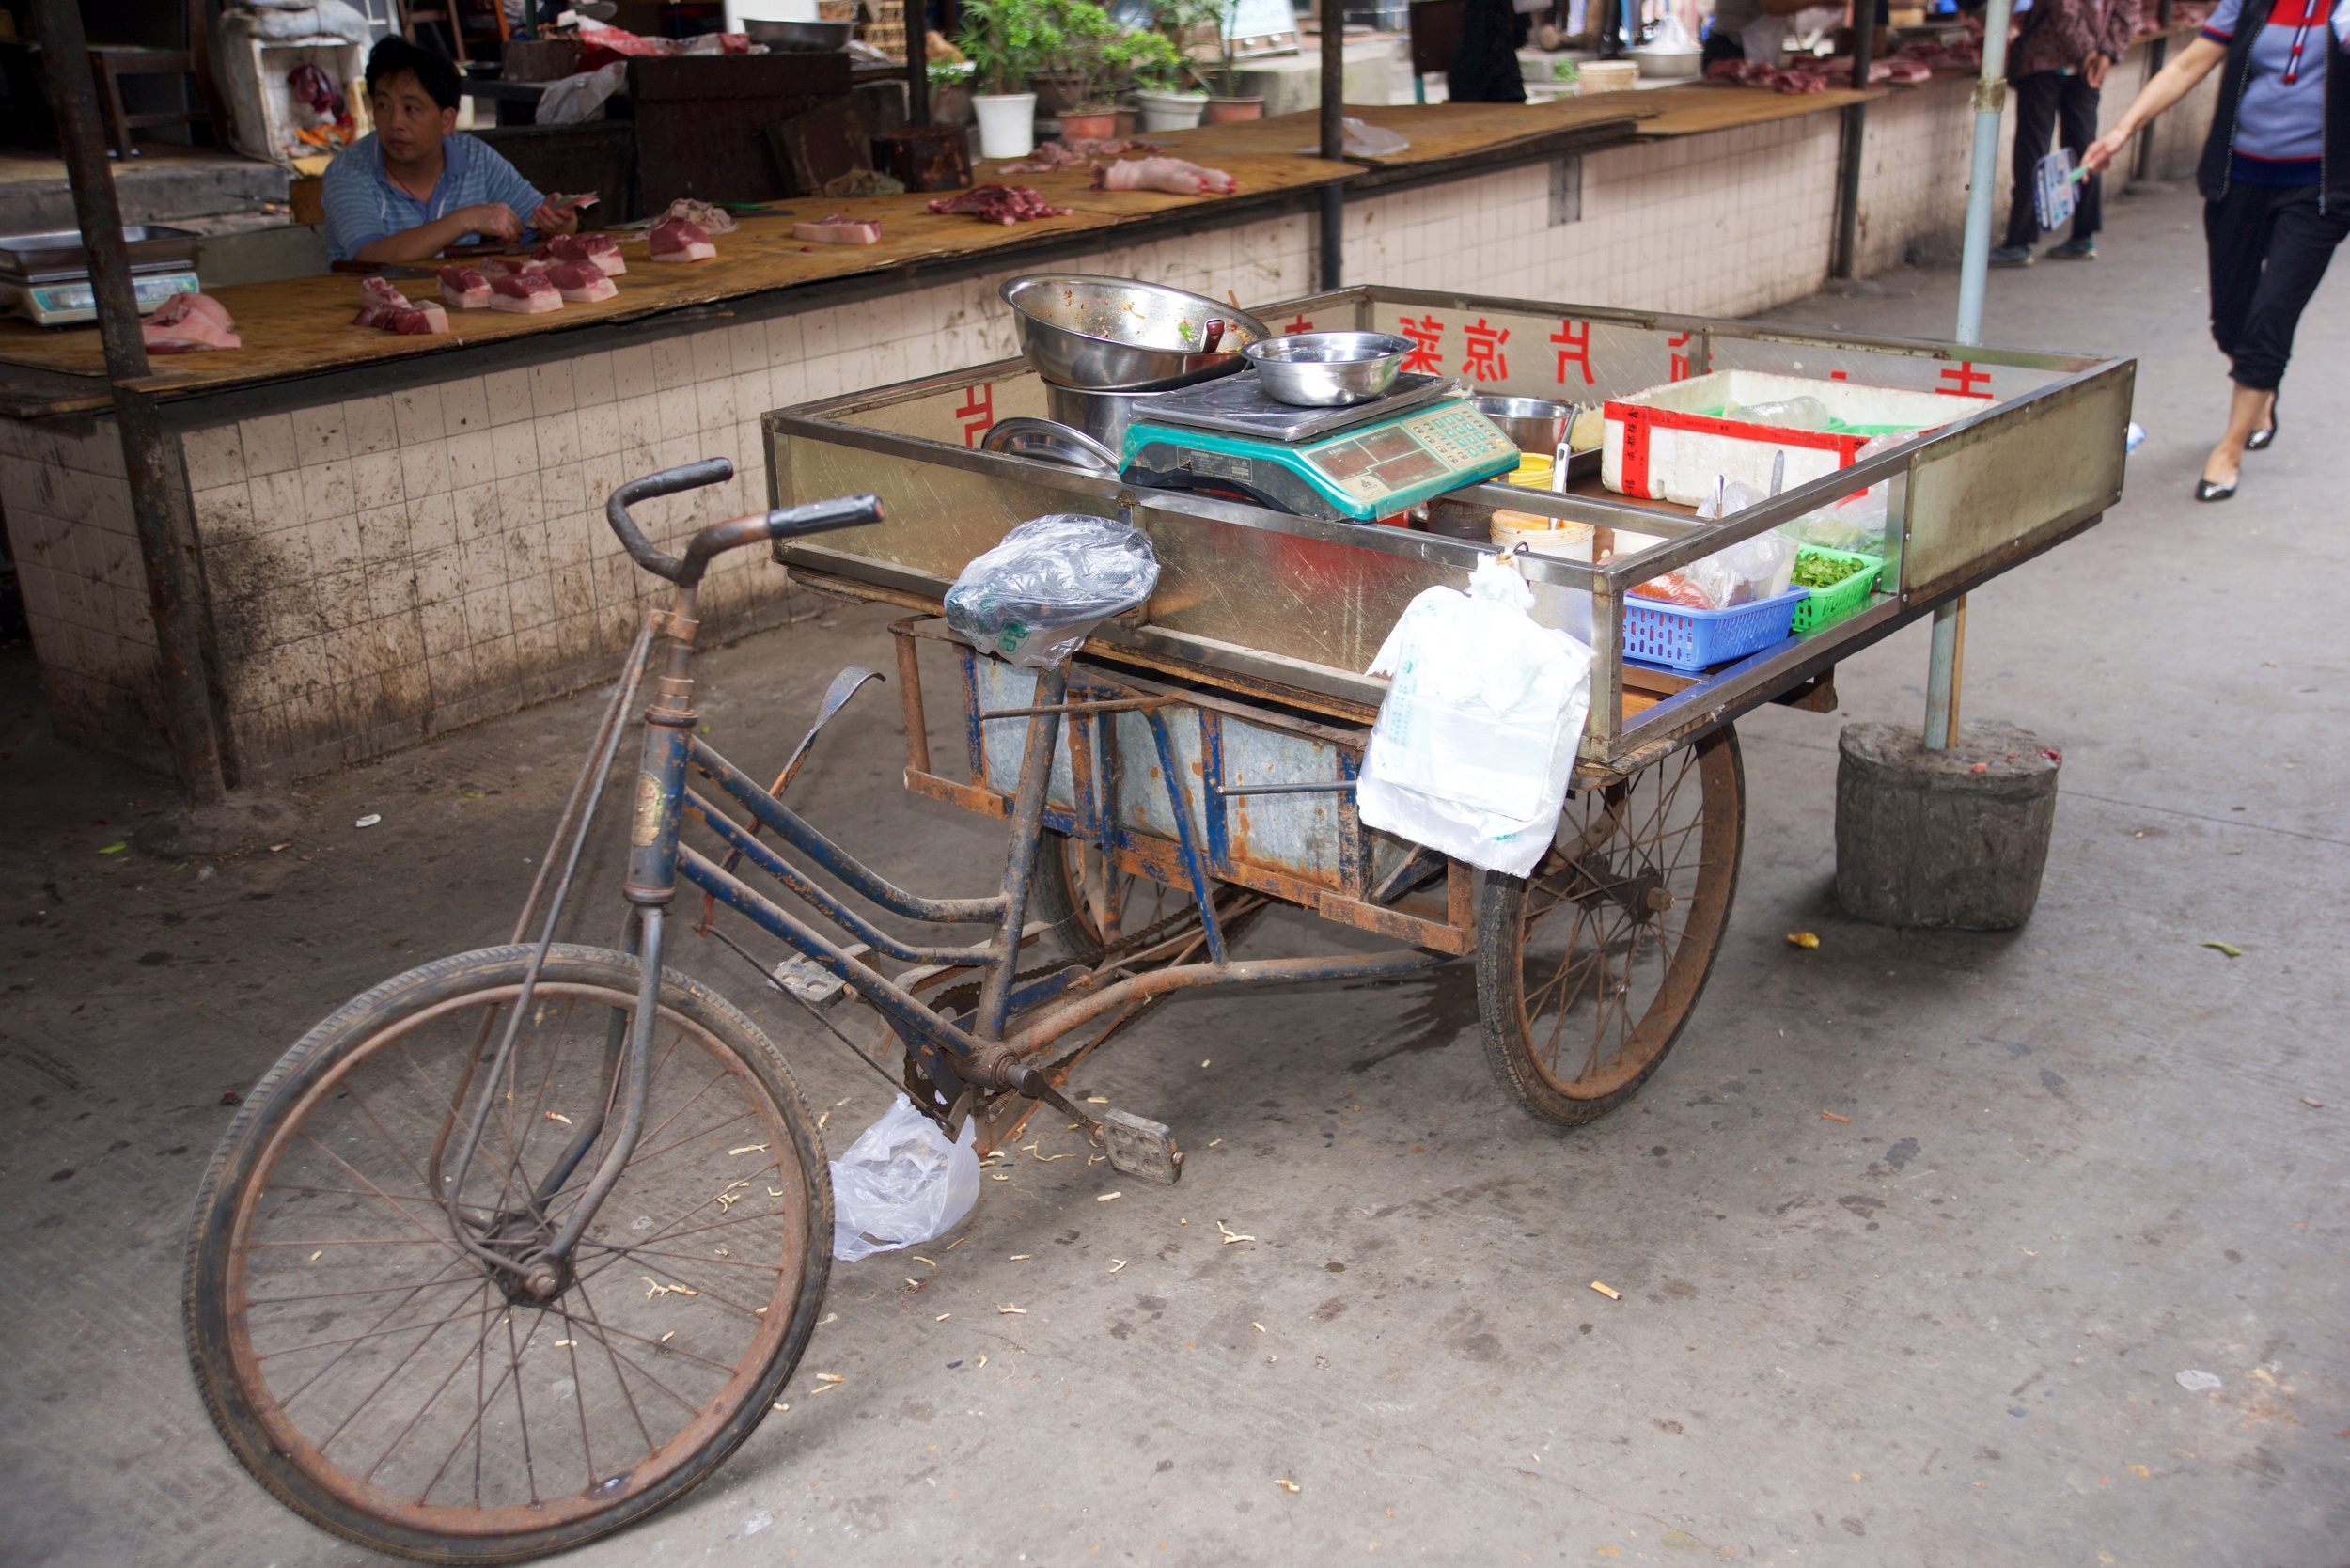  Bicycle in the market, Leshan 